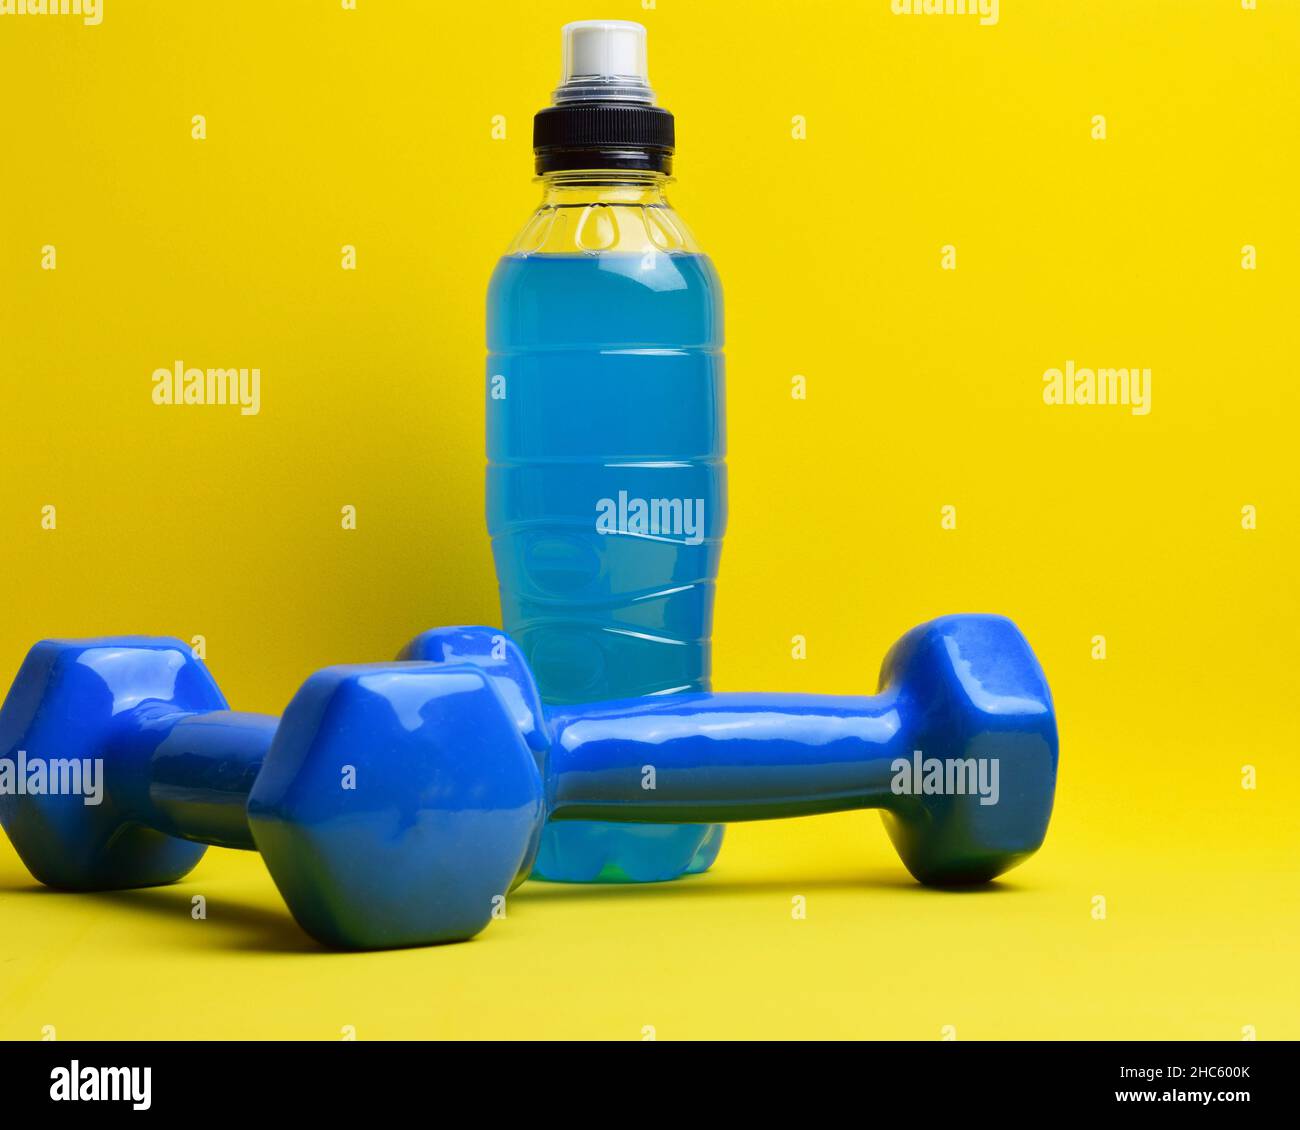 Closeup shot of dumbbells and an energizing drink on a yellow background Stock Photo